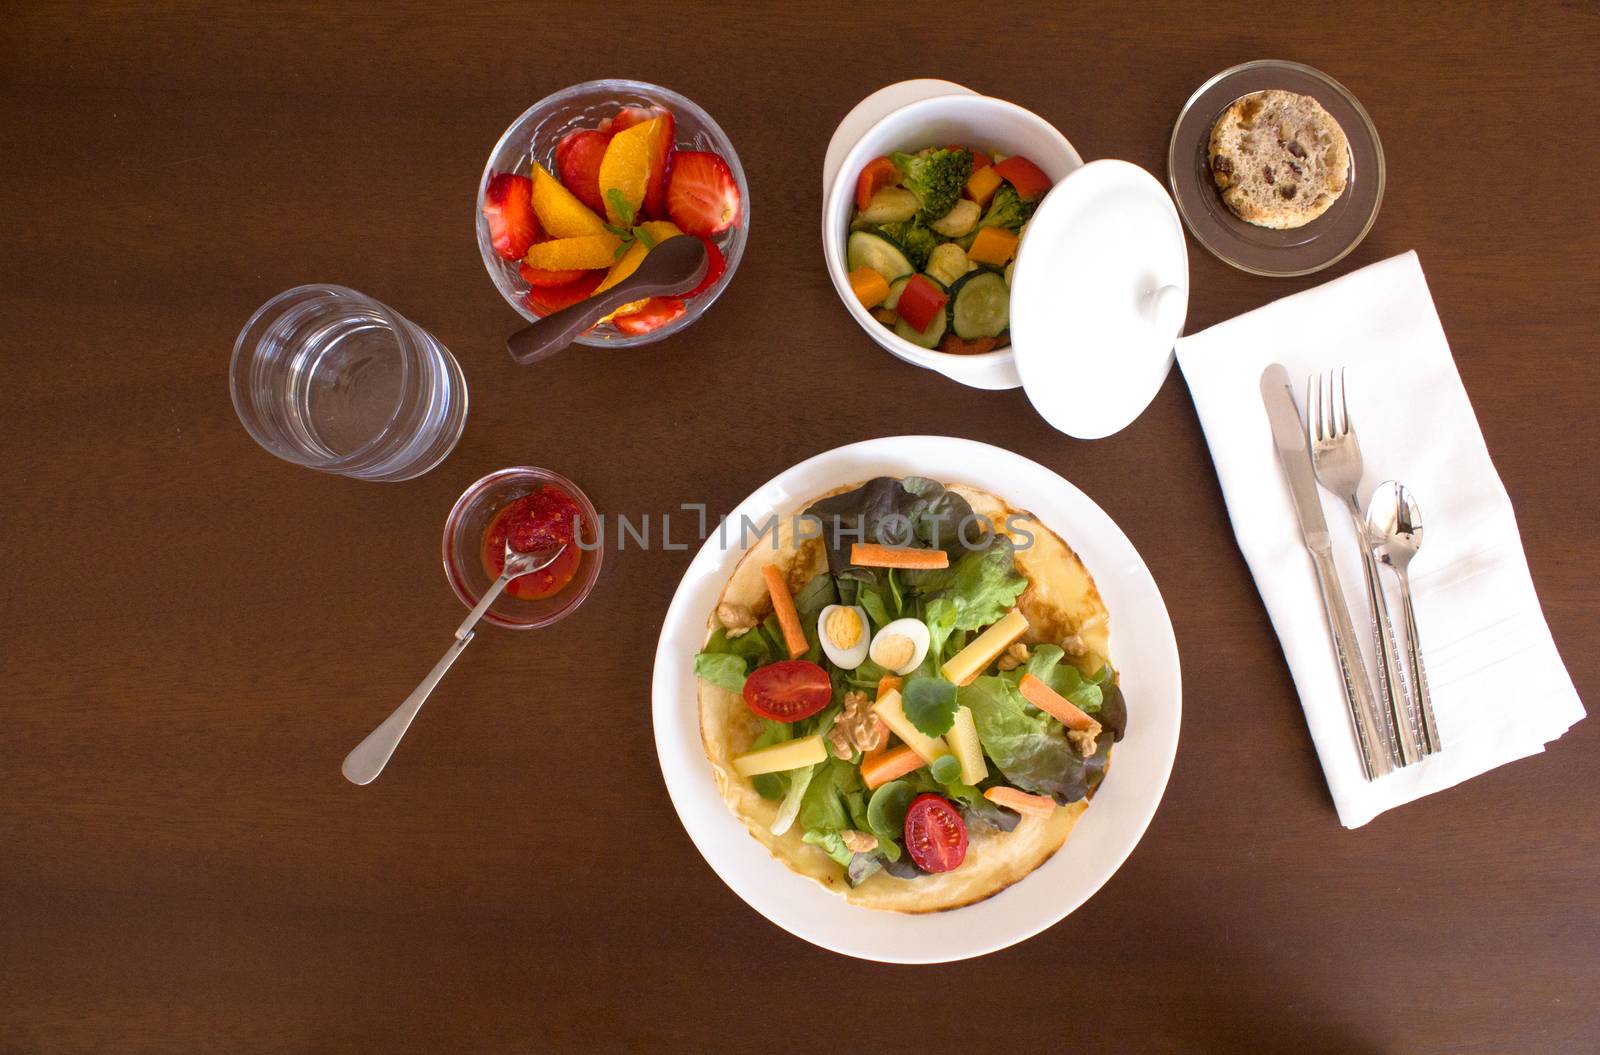 Full healthy menu composed of salad, chicken with vegetables, bread and fruit salad